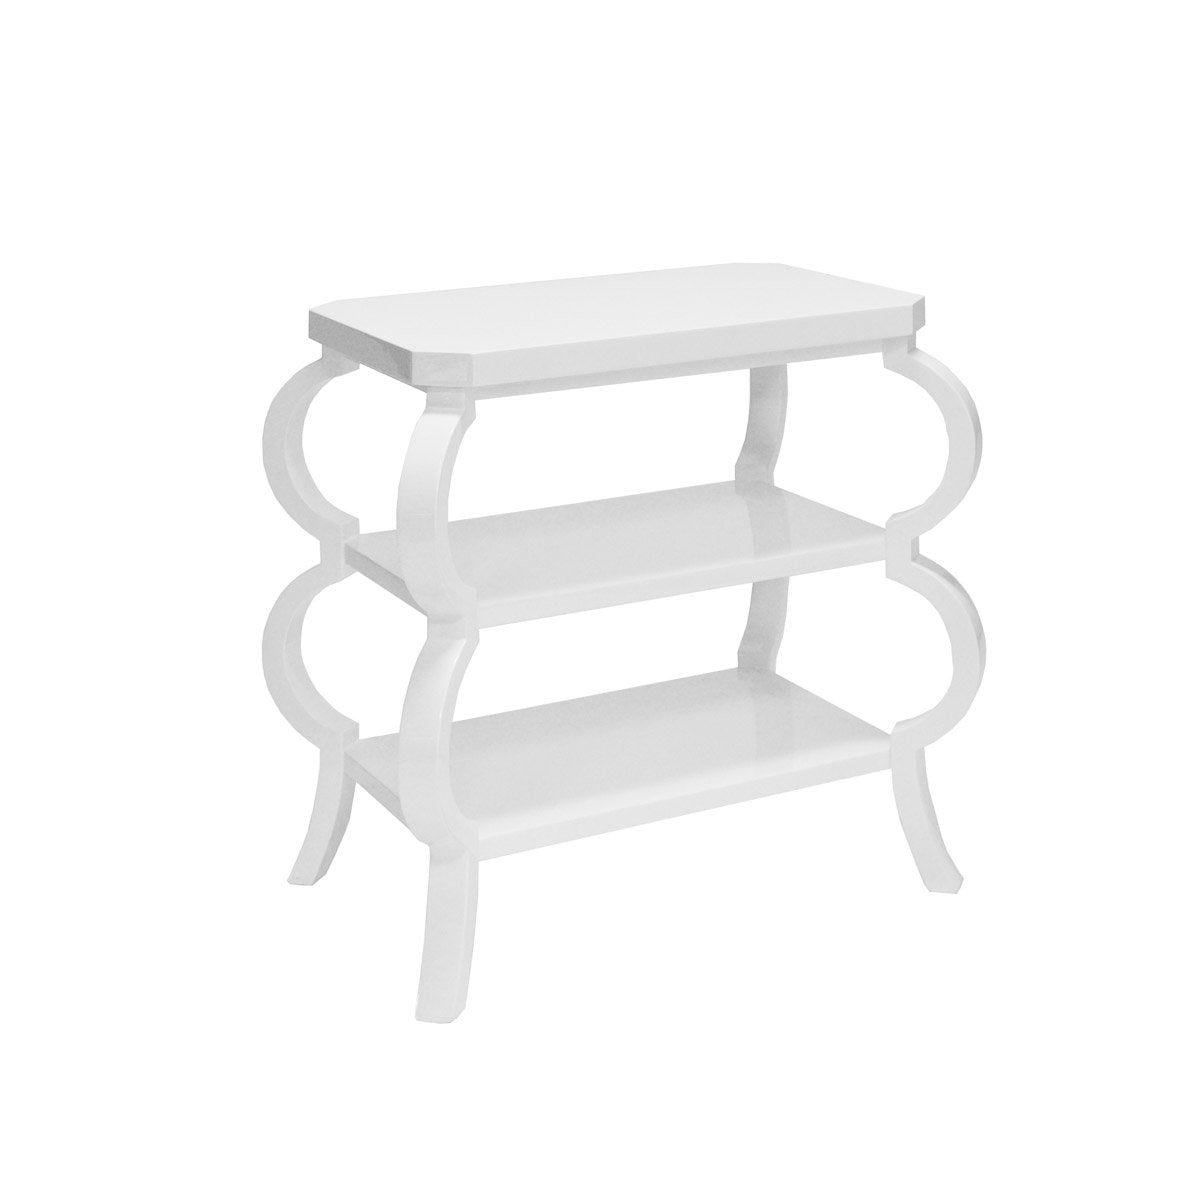 Carlisle Side Table Glossy White Lacquer. Right angle view. 